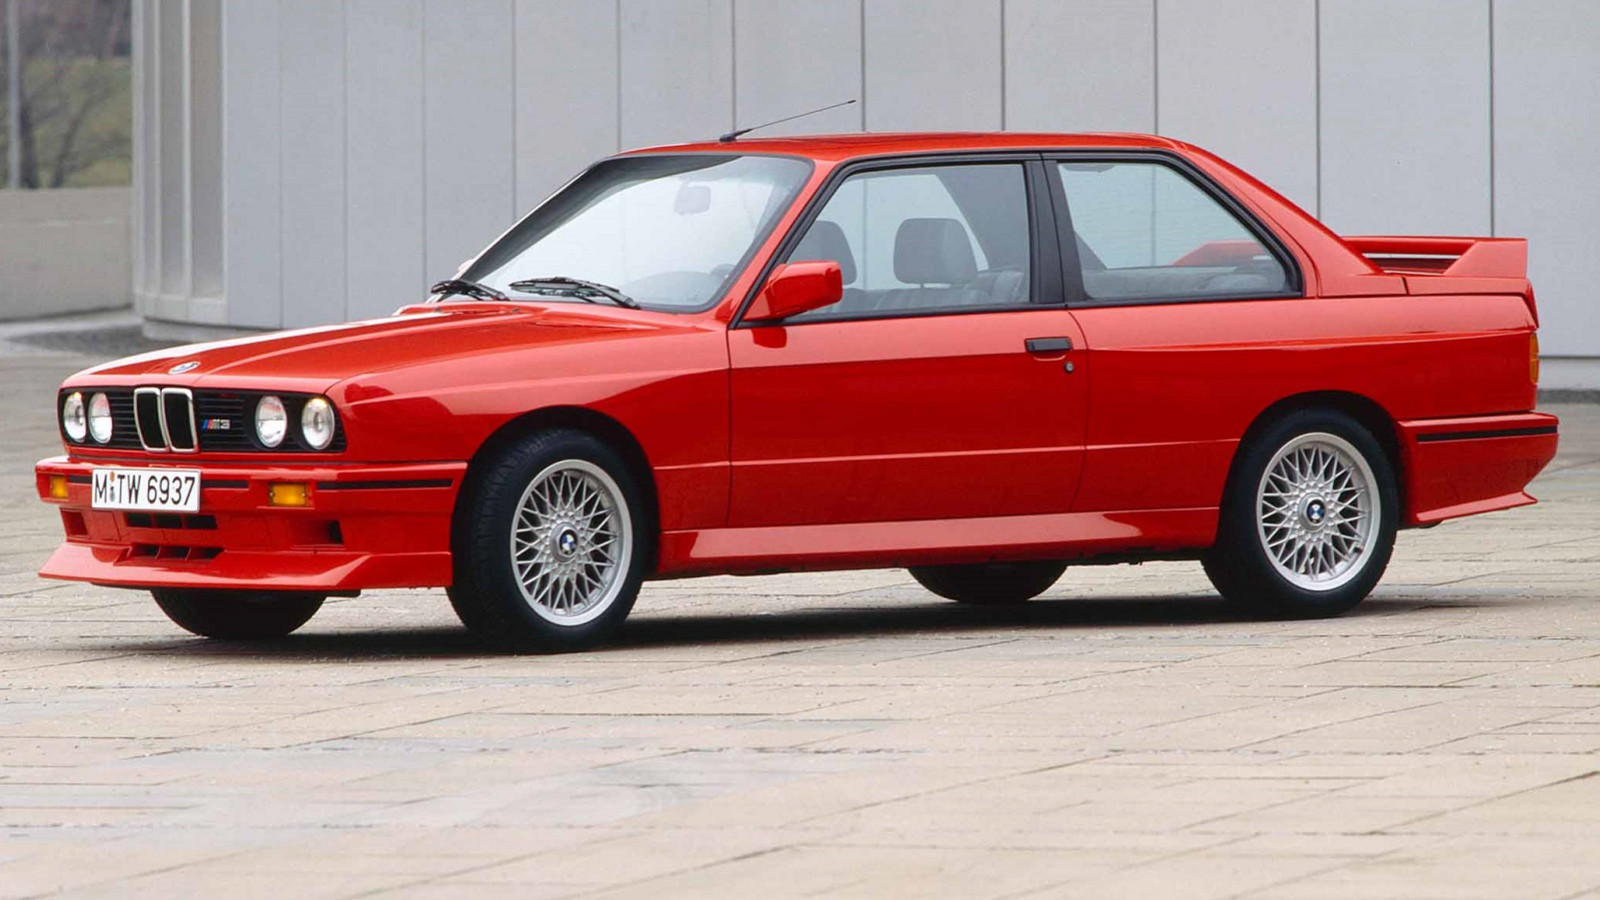 These are the 50 best ever BMW M cars